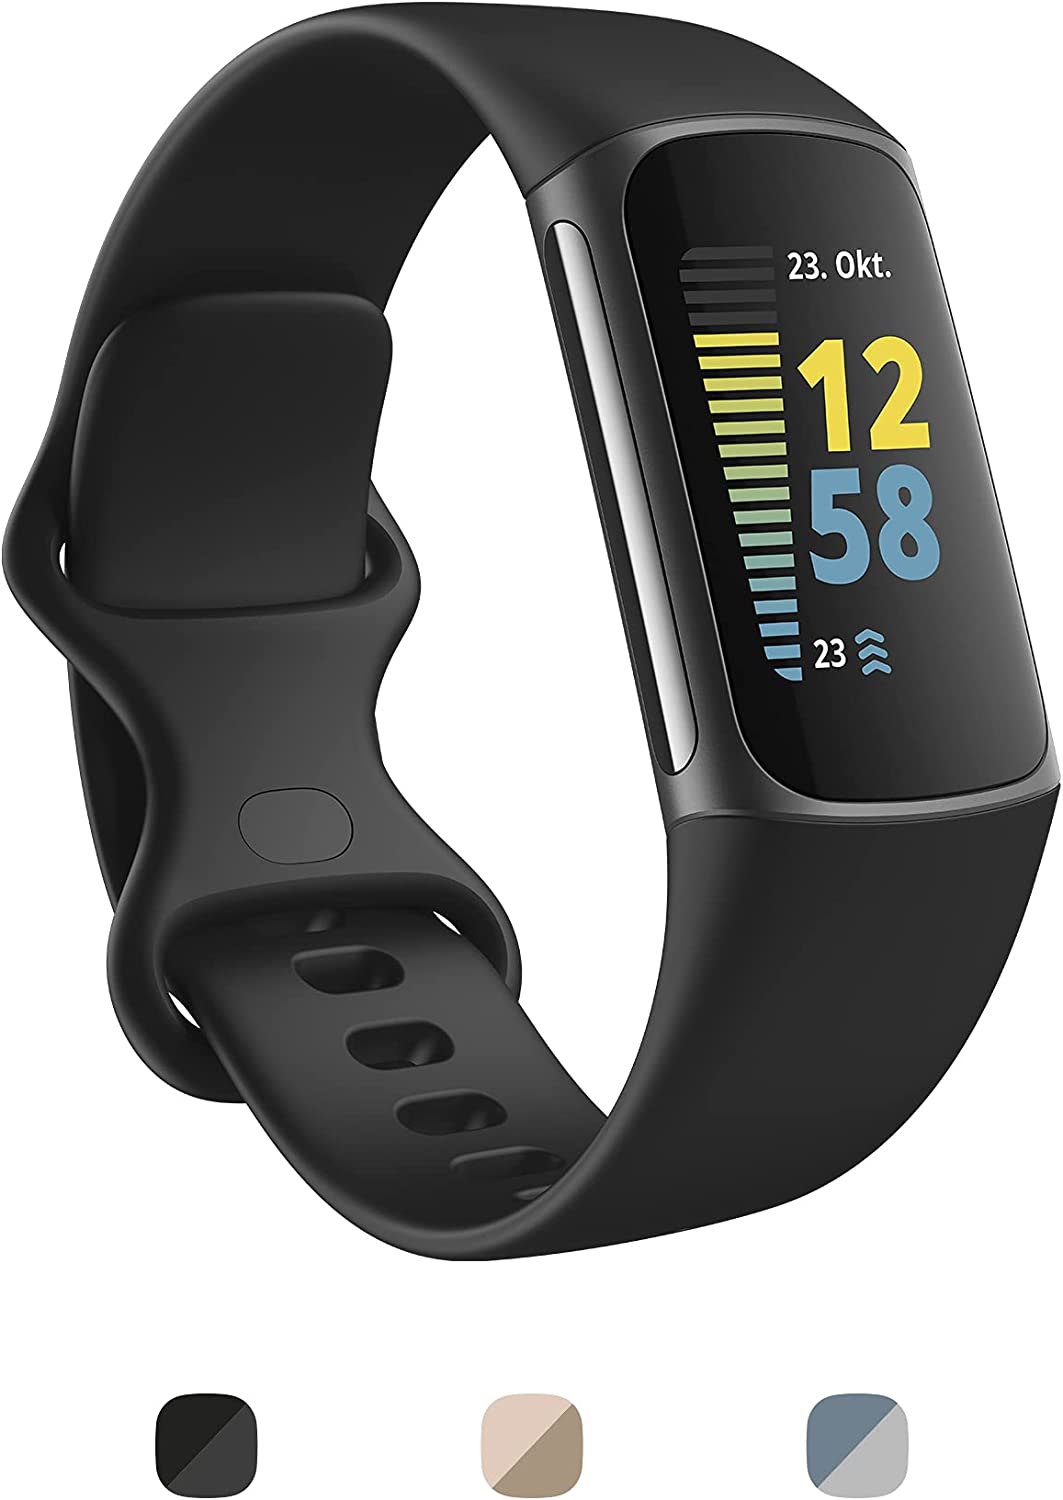 THE BEST FITBIT FOR YOUR HEALTH AND FITNESS